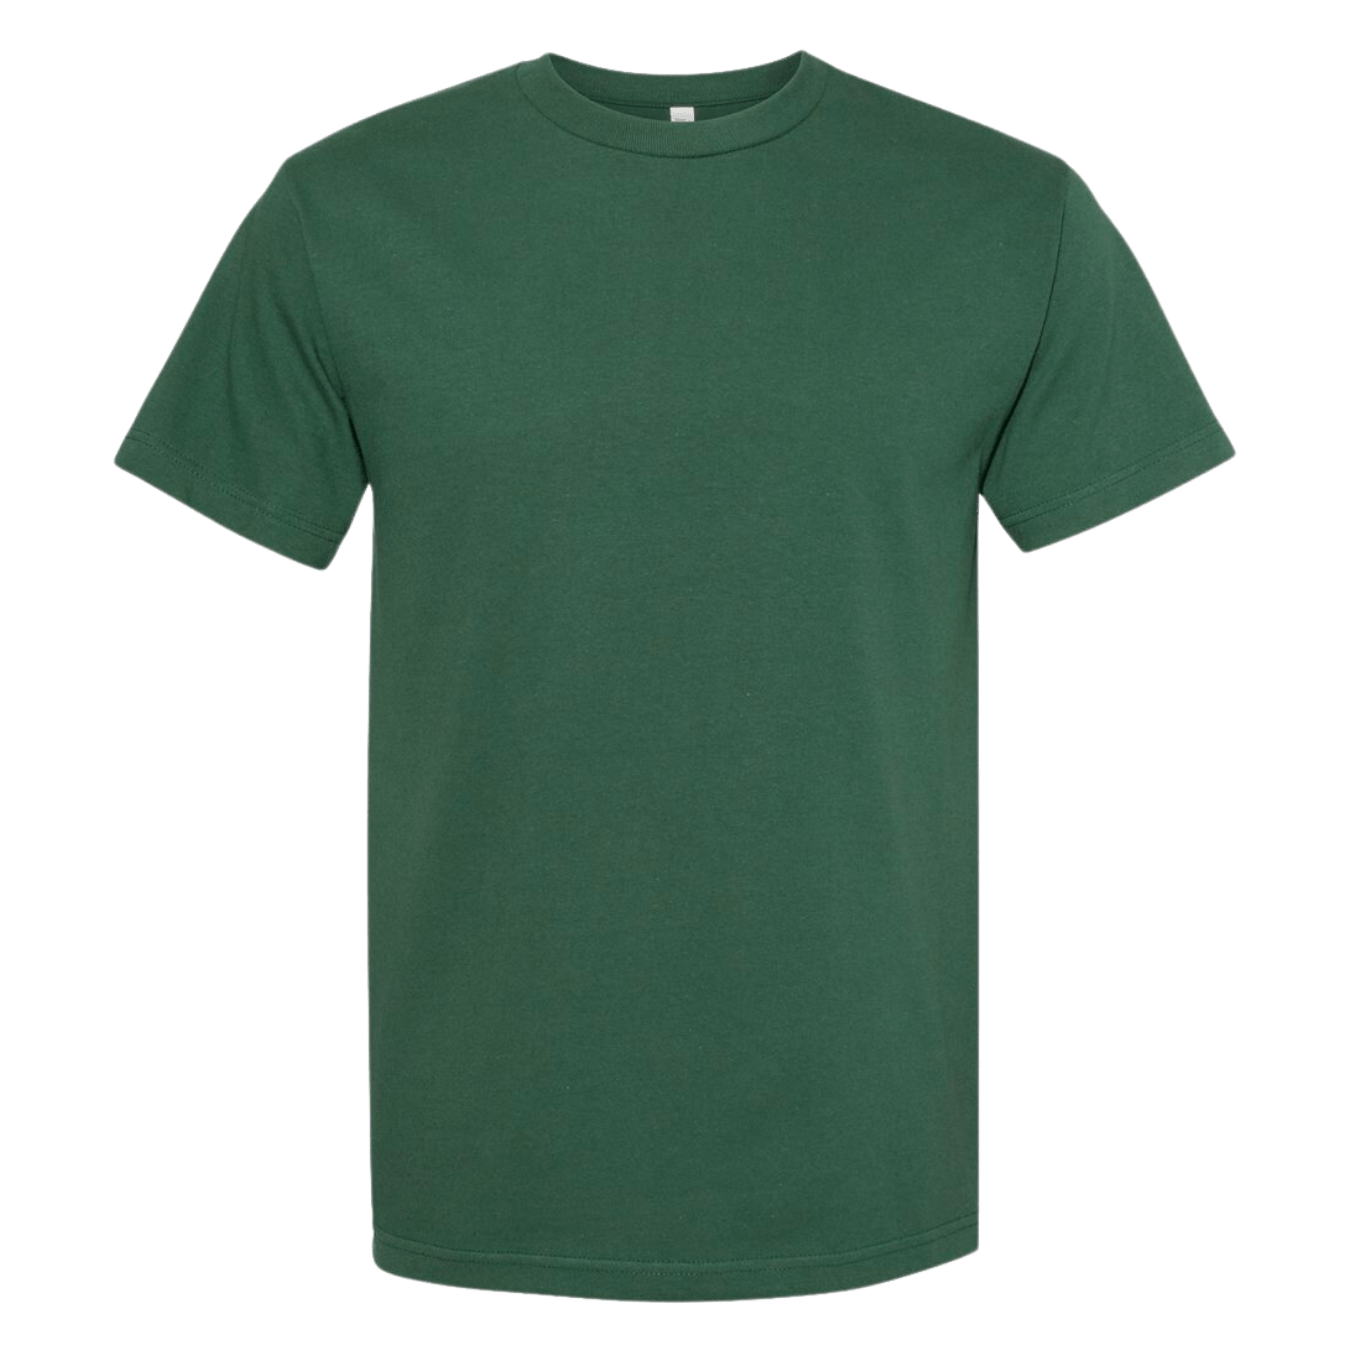 American Apparel - Heavyweight Cotton Tee - BY Print